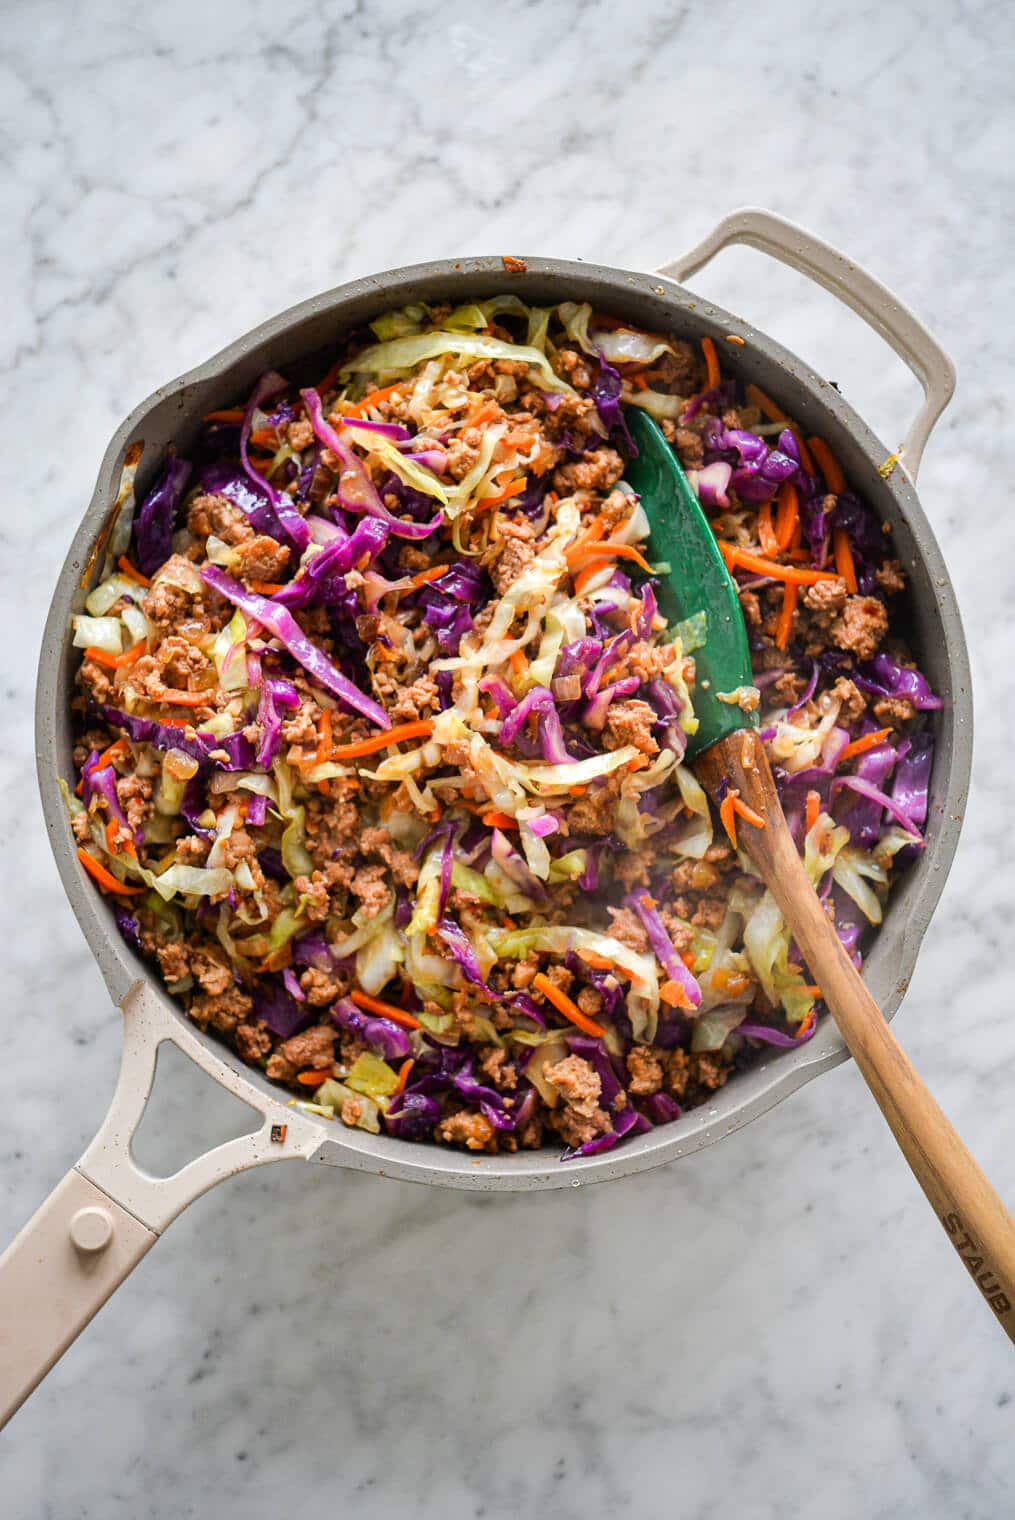 Sauté pan with egg roll in a bowl with vibrant colors of purple, orange, and green and green and brown spatula.